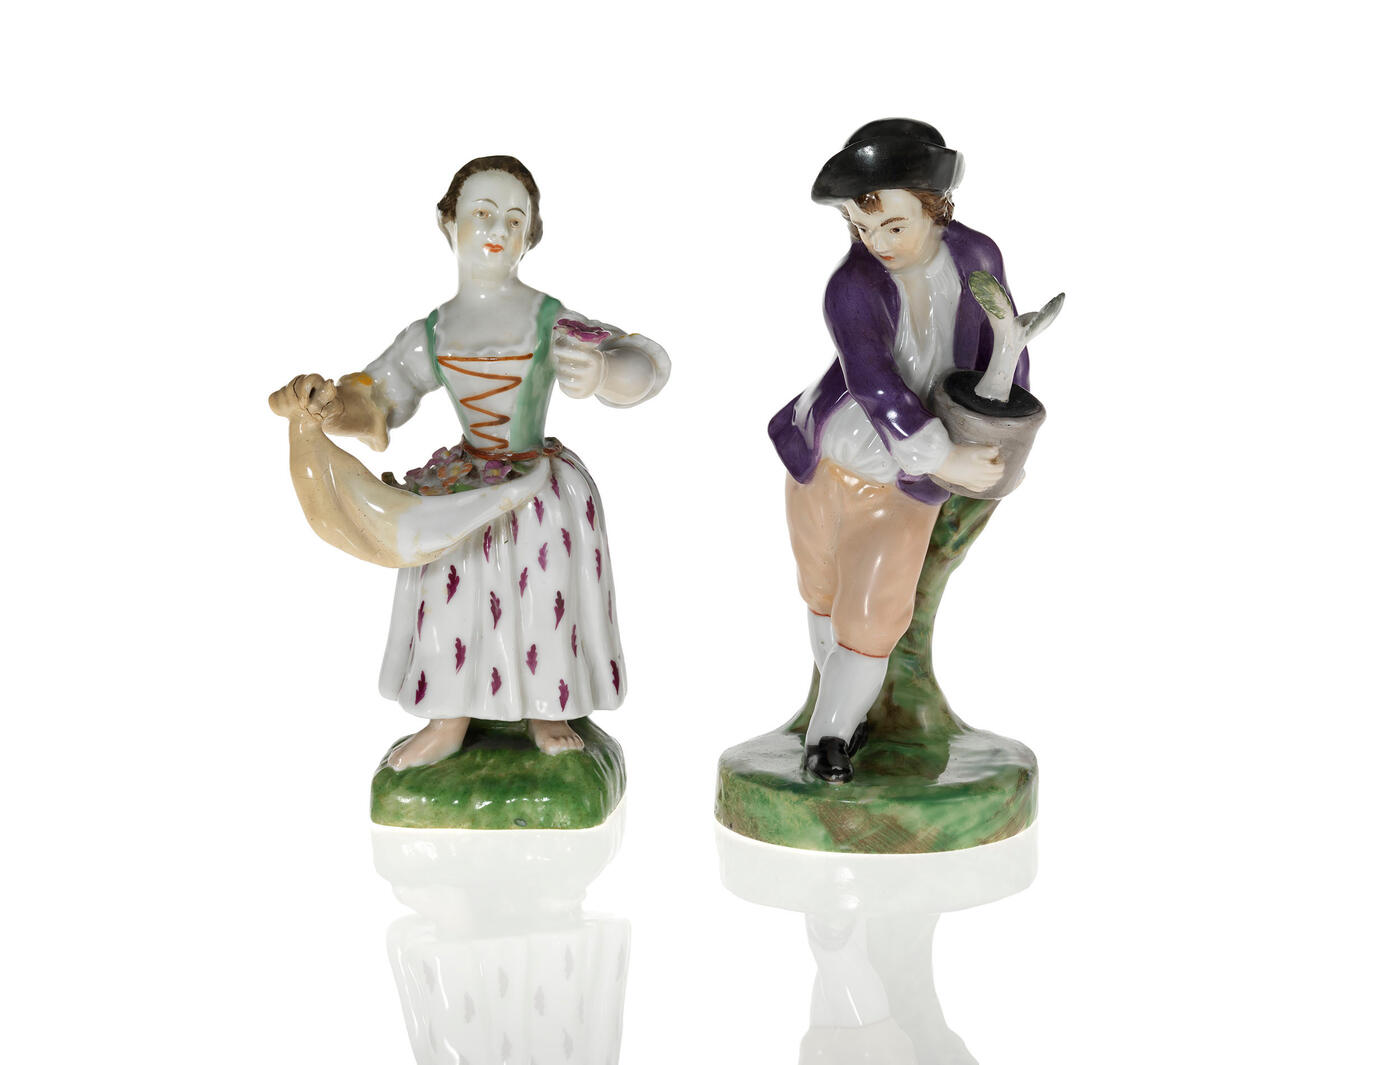 Two Porcelain Figurines of a Flower Girl and Boy